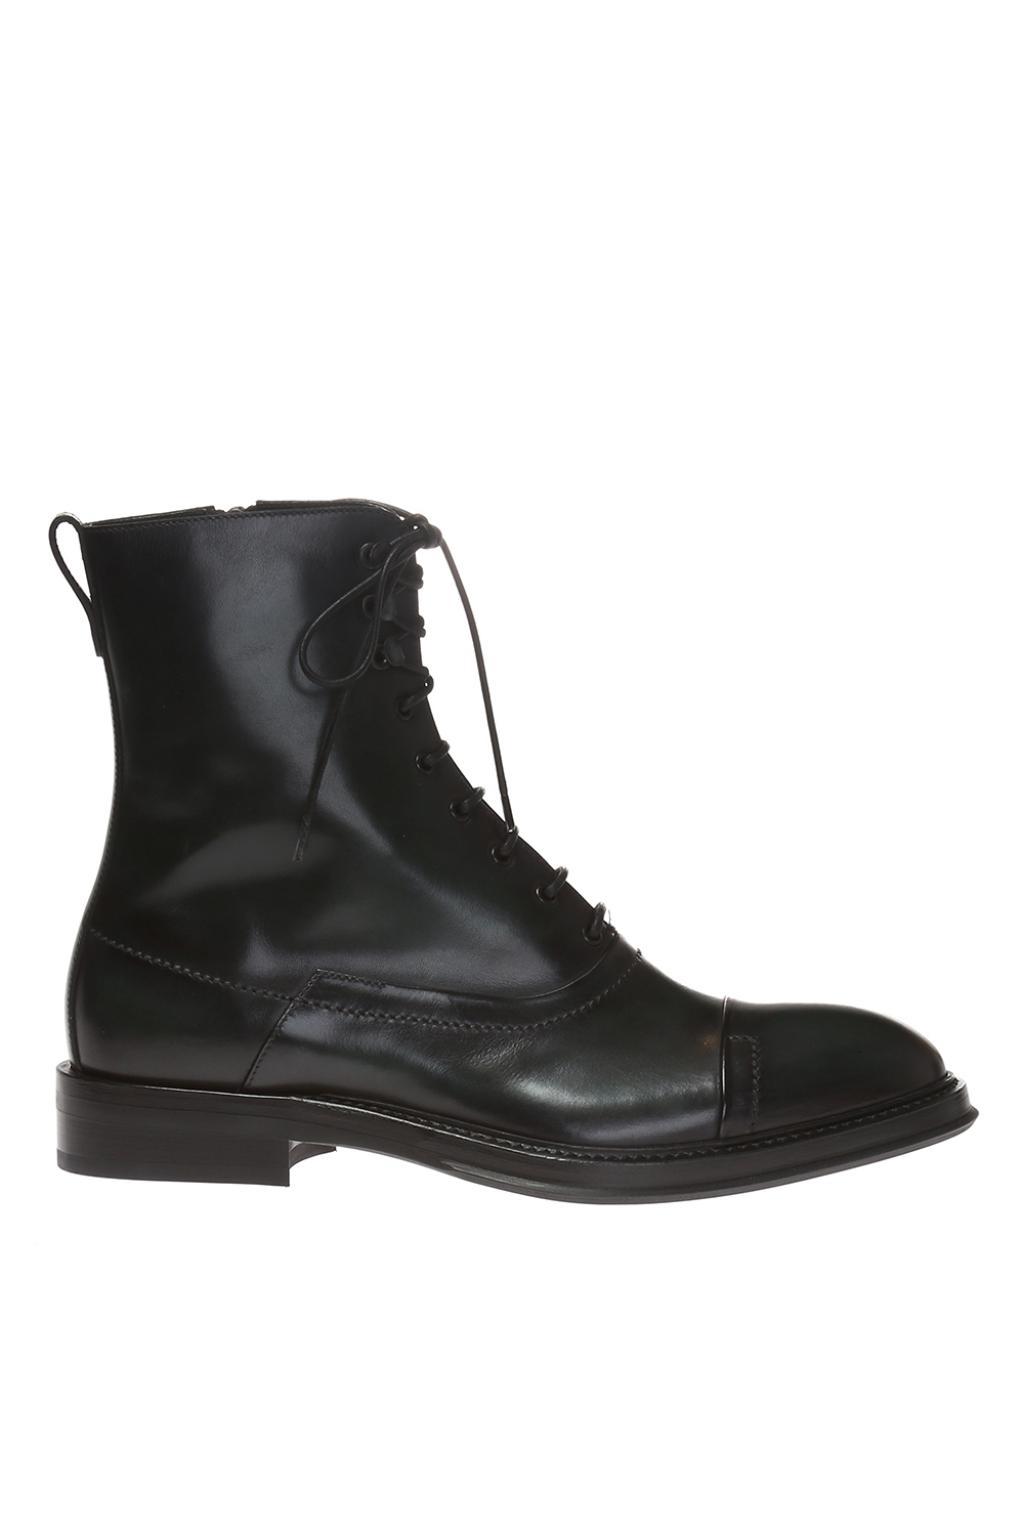 Berluti Leather 'eris' Lace-up Ankle Boots in Black for Men - Lyst